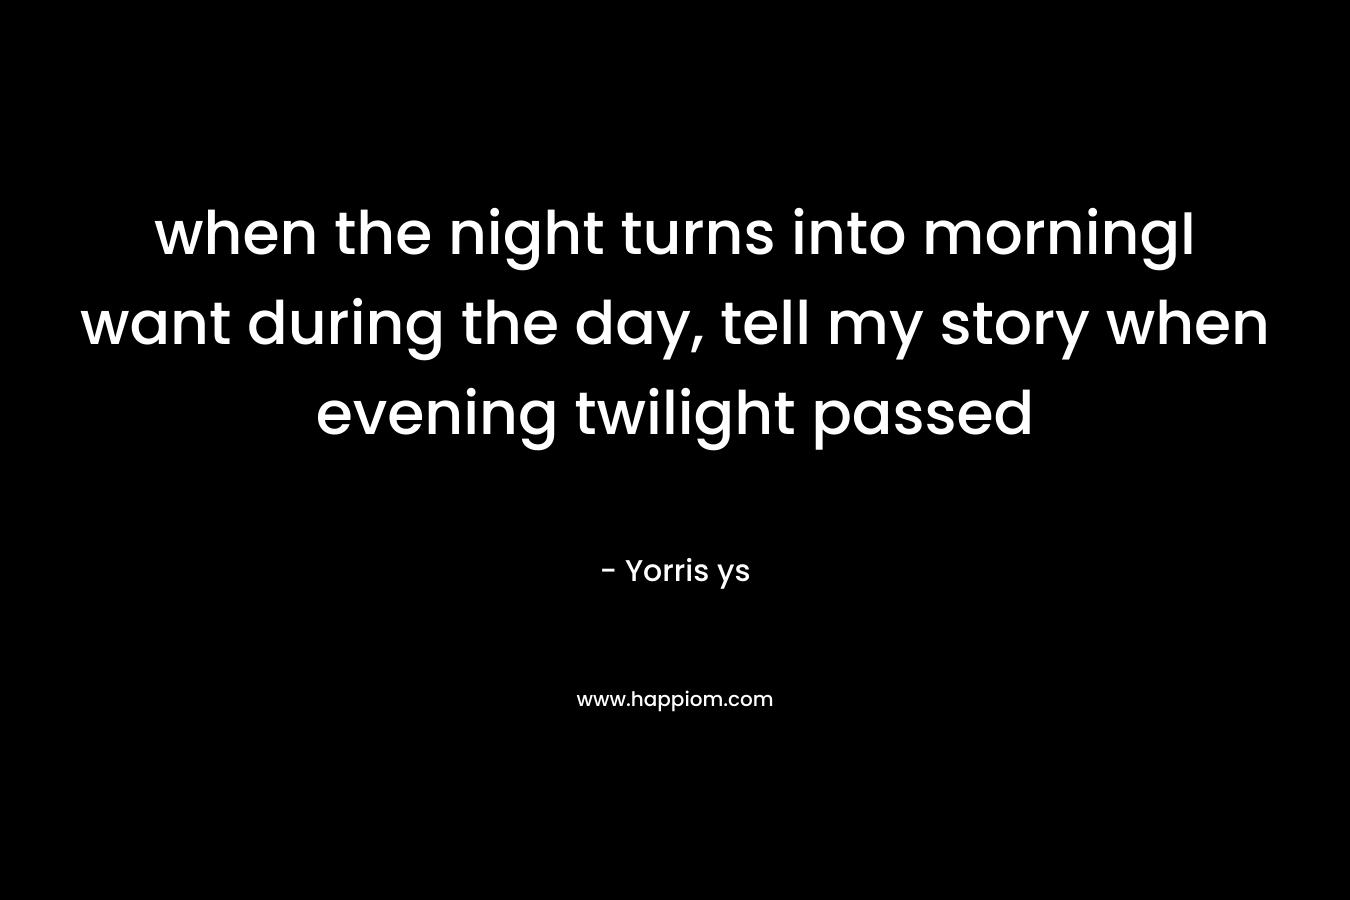 when the night turns into morningI want during the day, tell my story when evening twilight passed